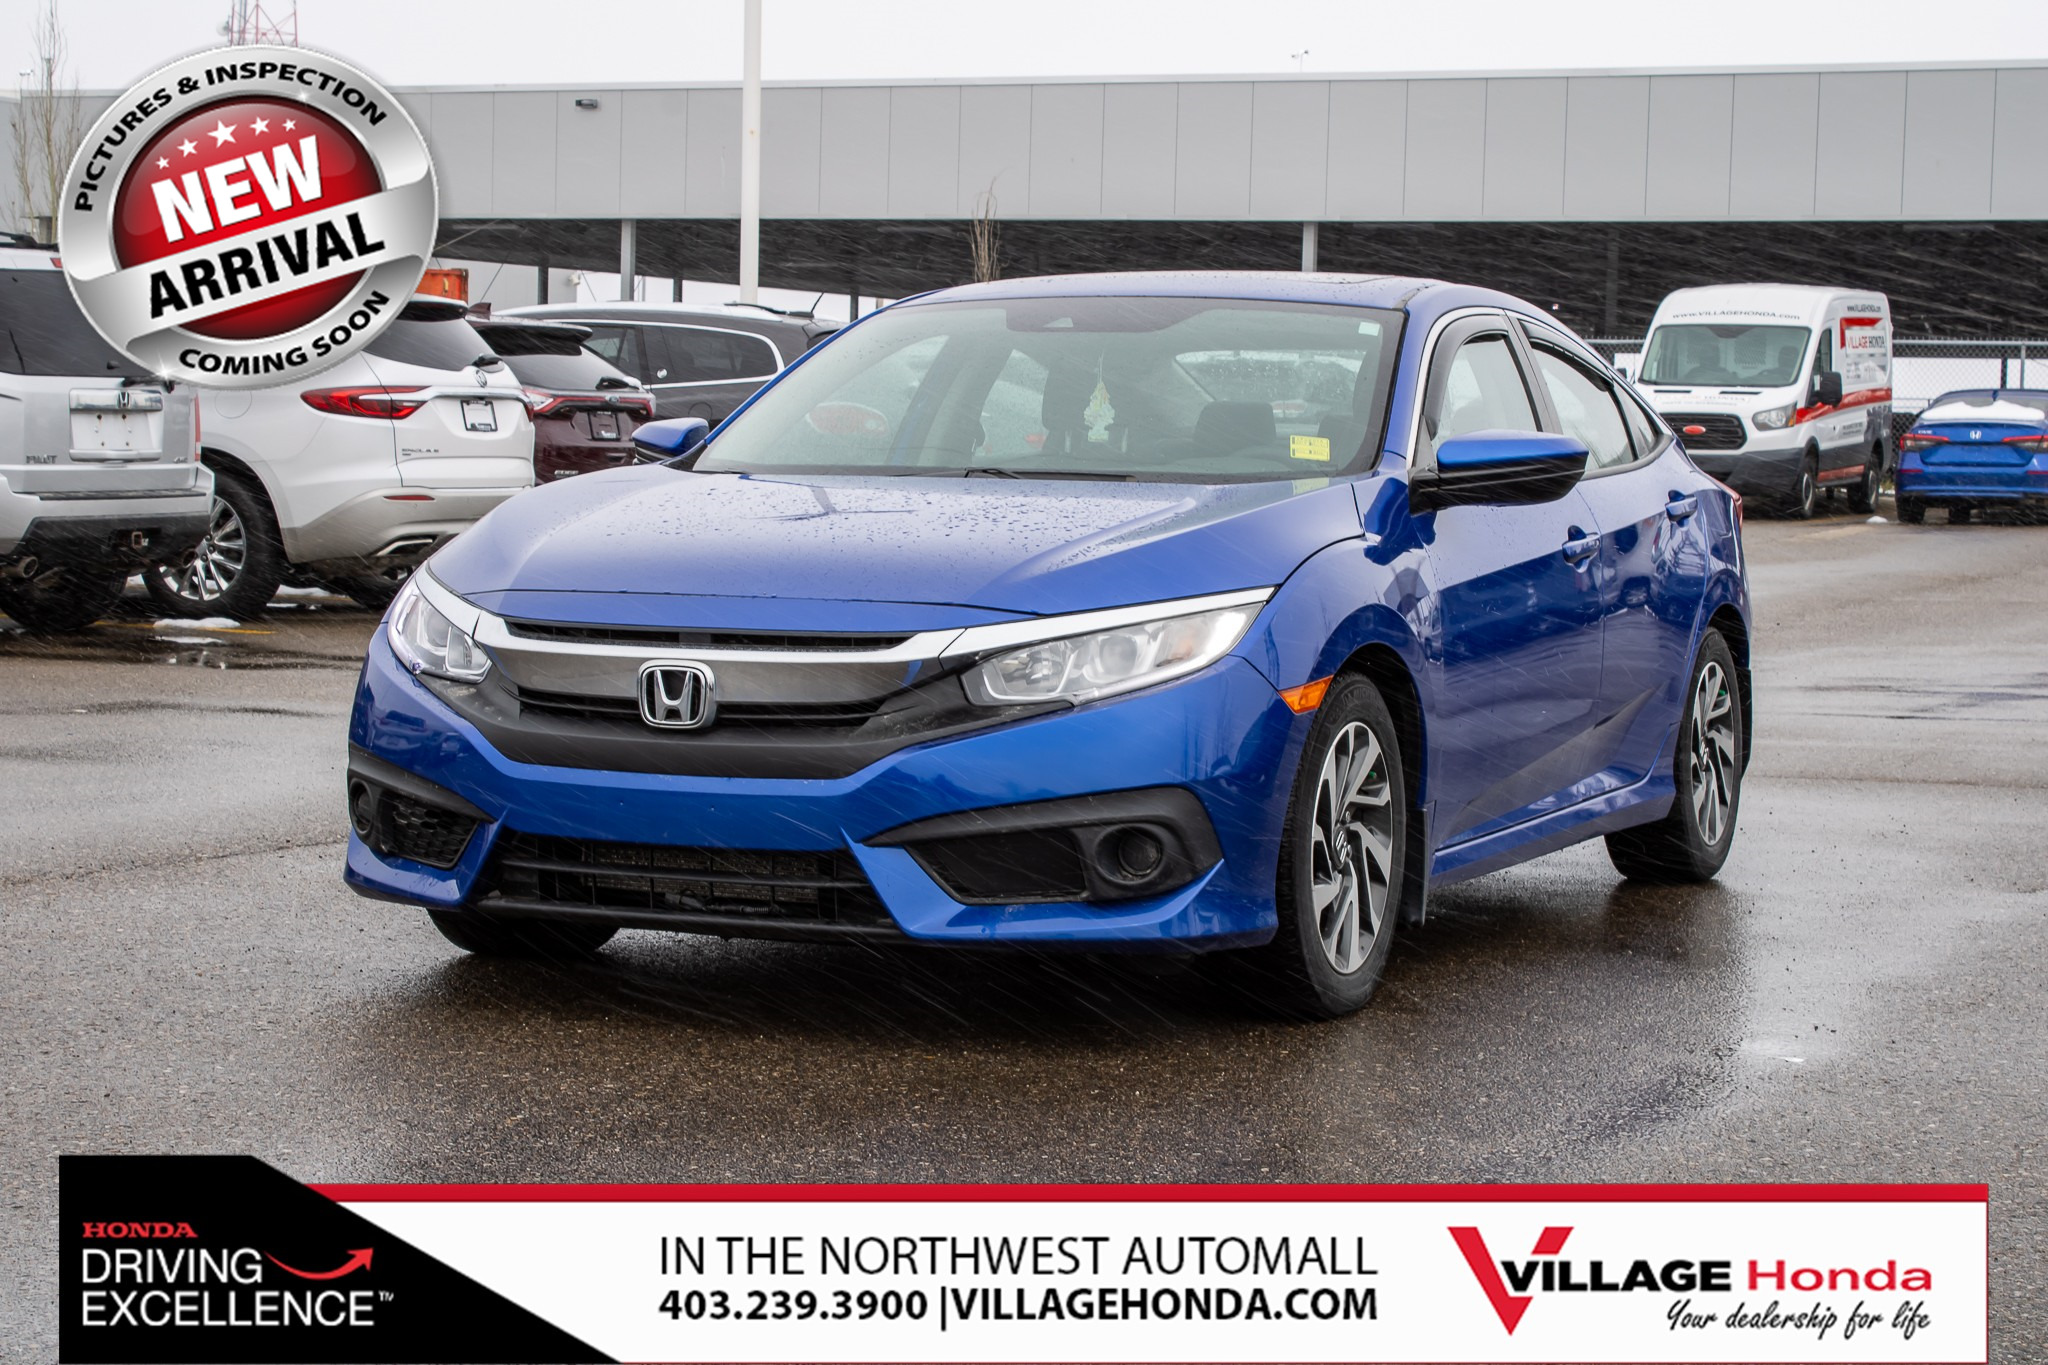 2017 Honda Civic EX NEW ARRIVAL! POWER SUNROOF! HEATED FRONT SEATS!